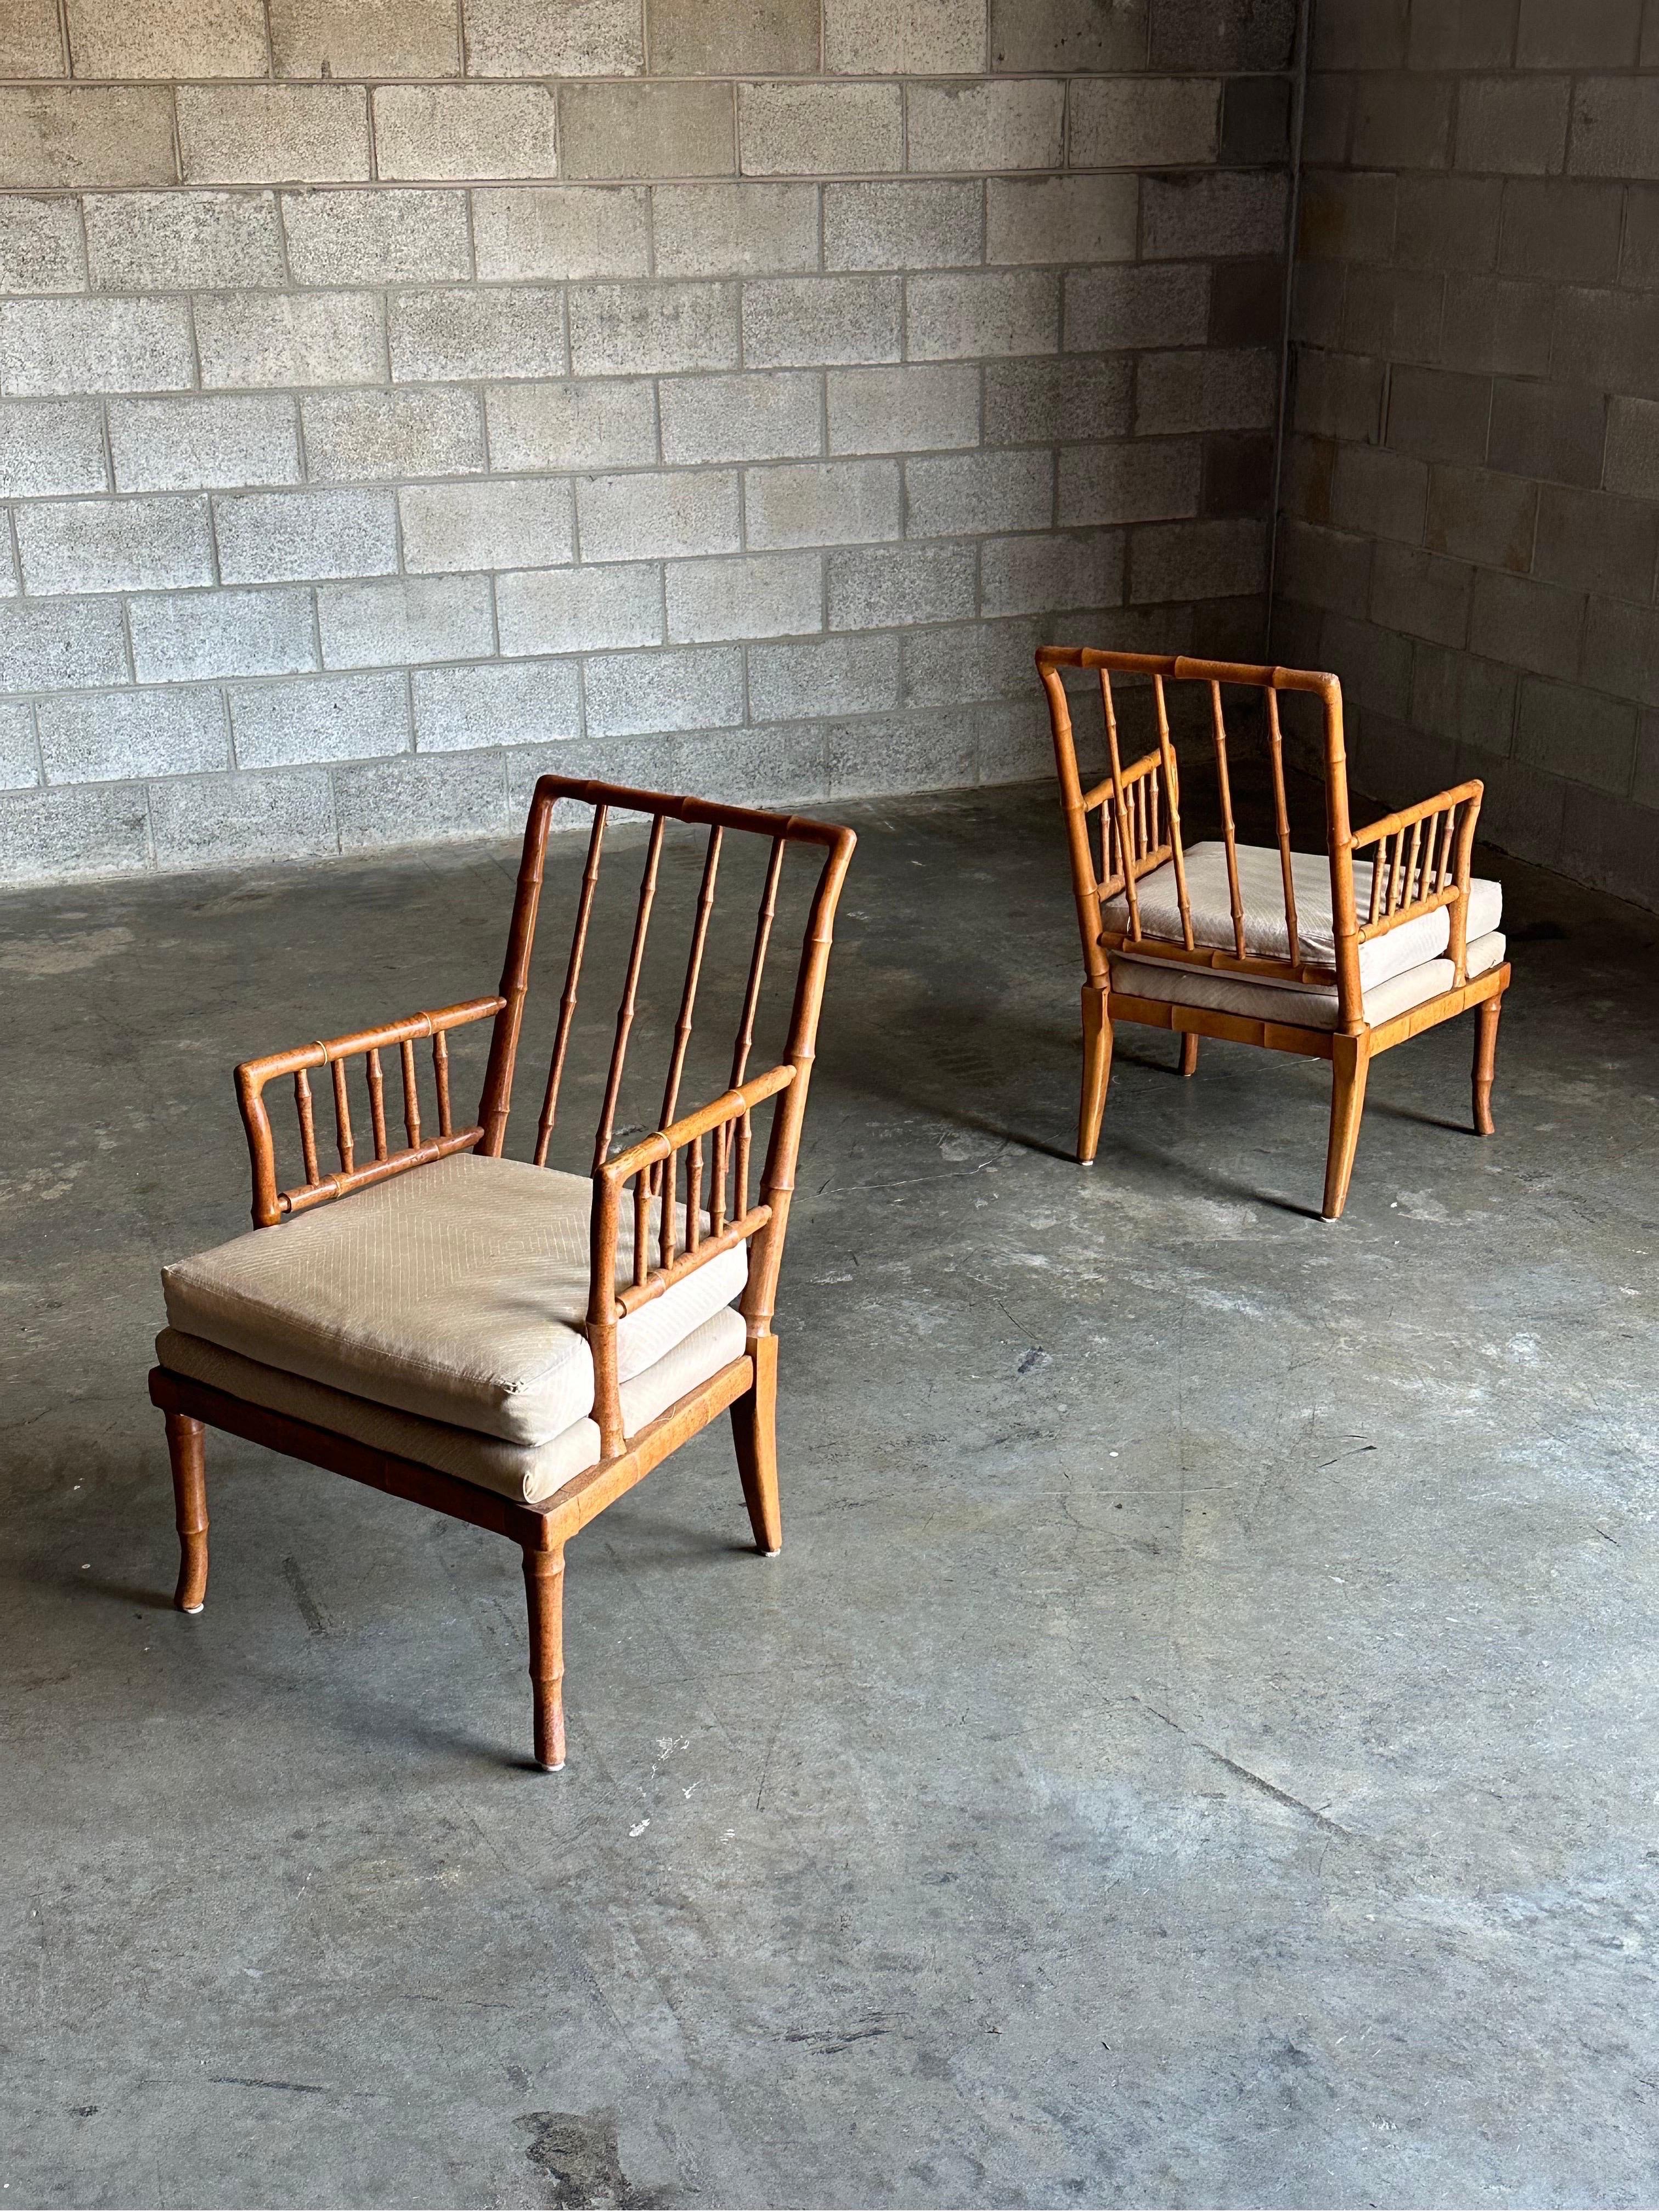 Gorgeous pair of vintage faux bamboo chairs with T.H. Robsjohn-Gibbings styled flared legs. Very unique chairs featuring faux bamboo throughout, a spindle style back and arms. Unique size allows for lots of applications- pair of club chairs, accent